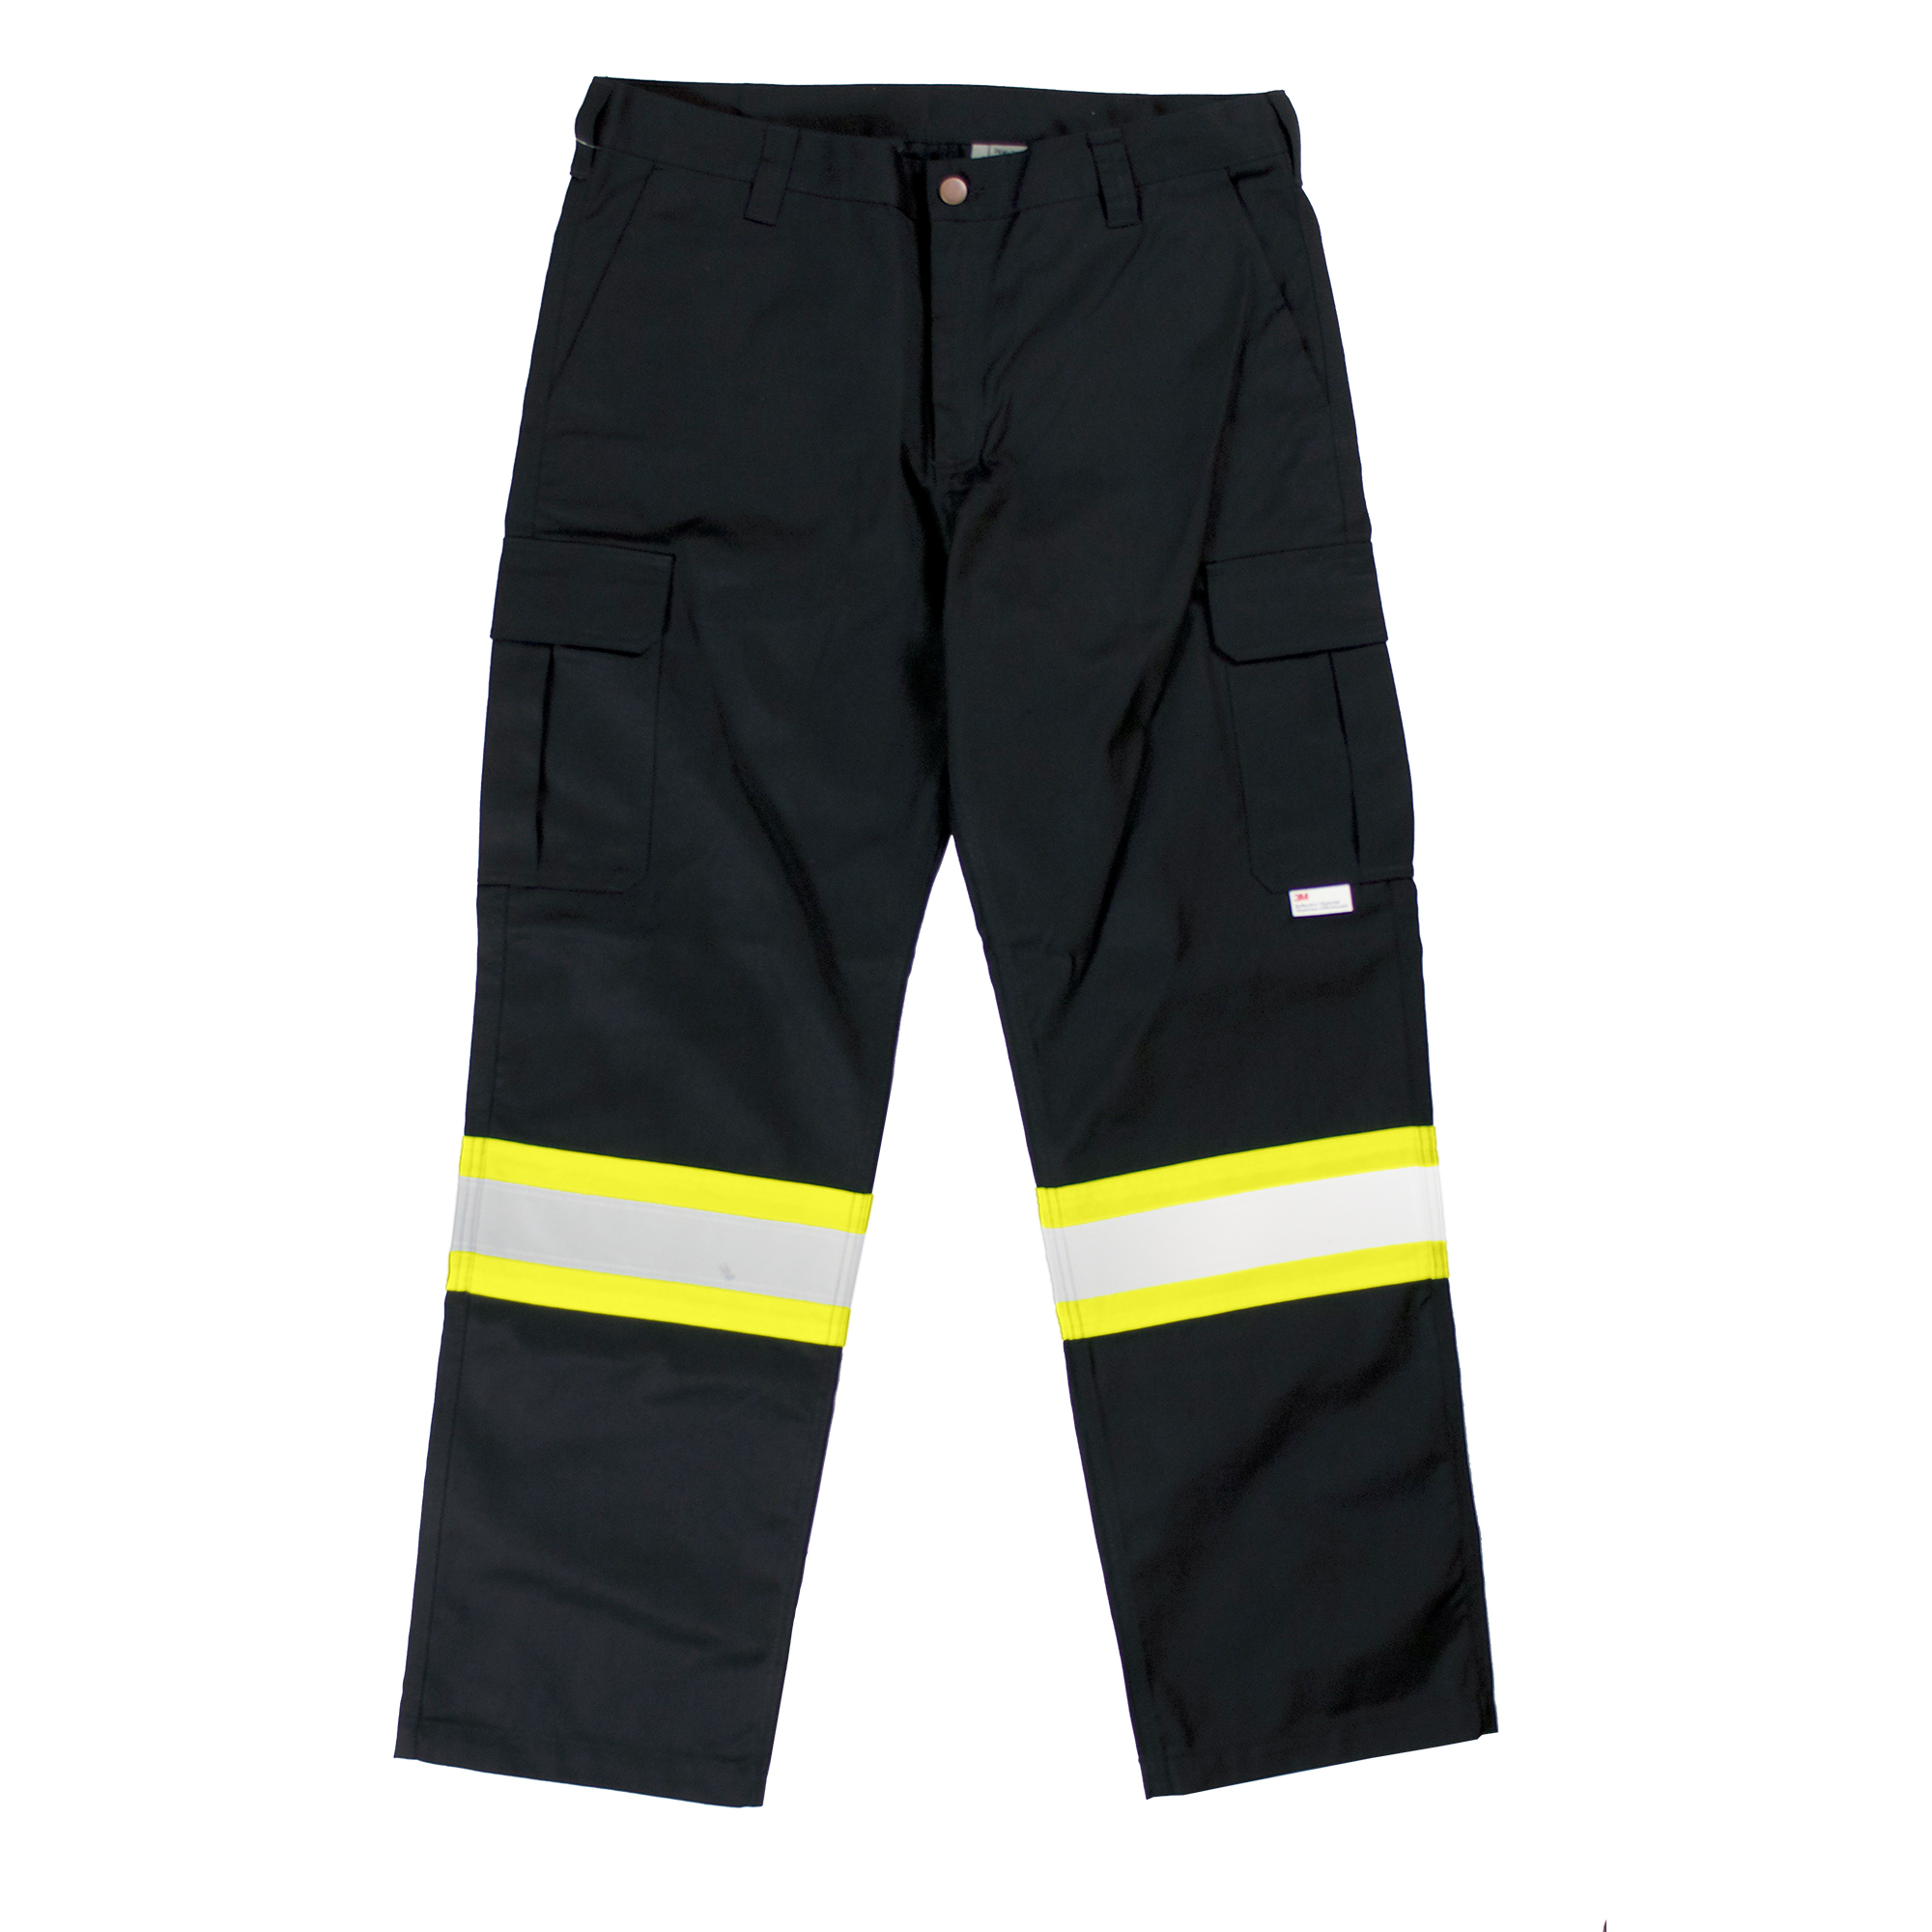 Tough Duck, Safety Cargo Utility Pant, Waist 44 in, Inseam 32 in, Color Black, Model S60711